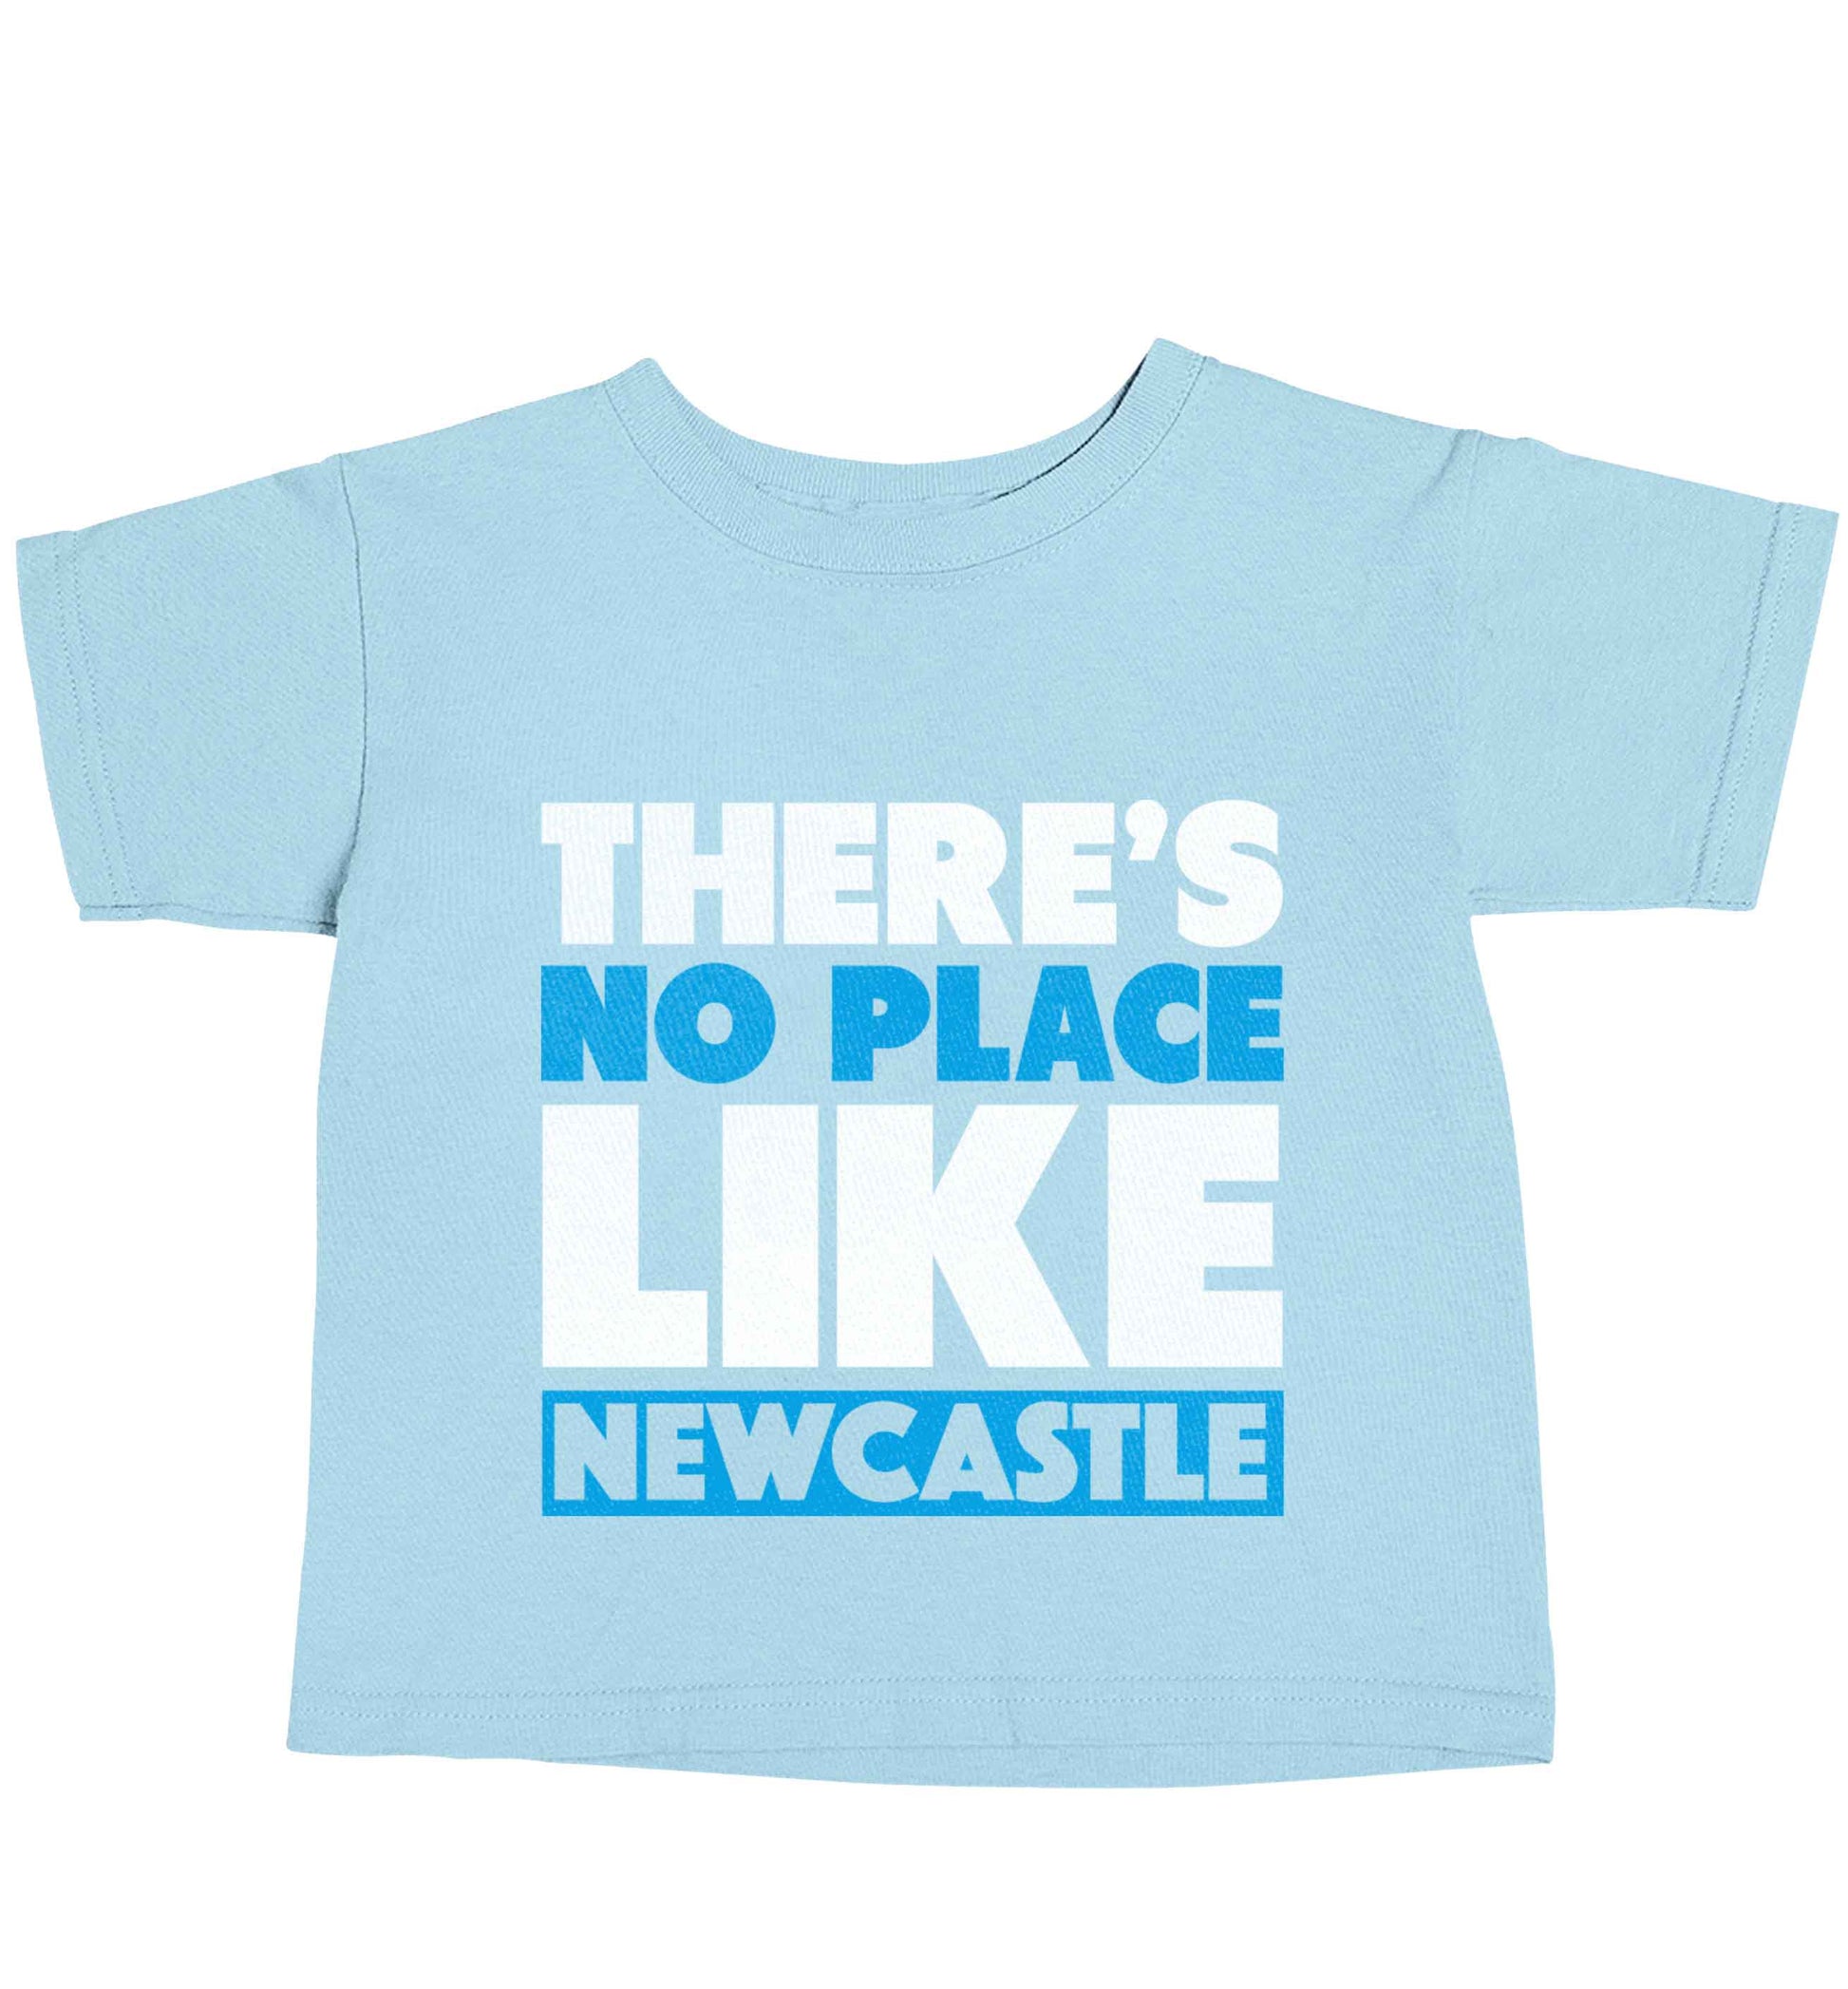 There's no place like Newcastle light blue baby toddler Tshirt 2 Years